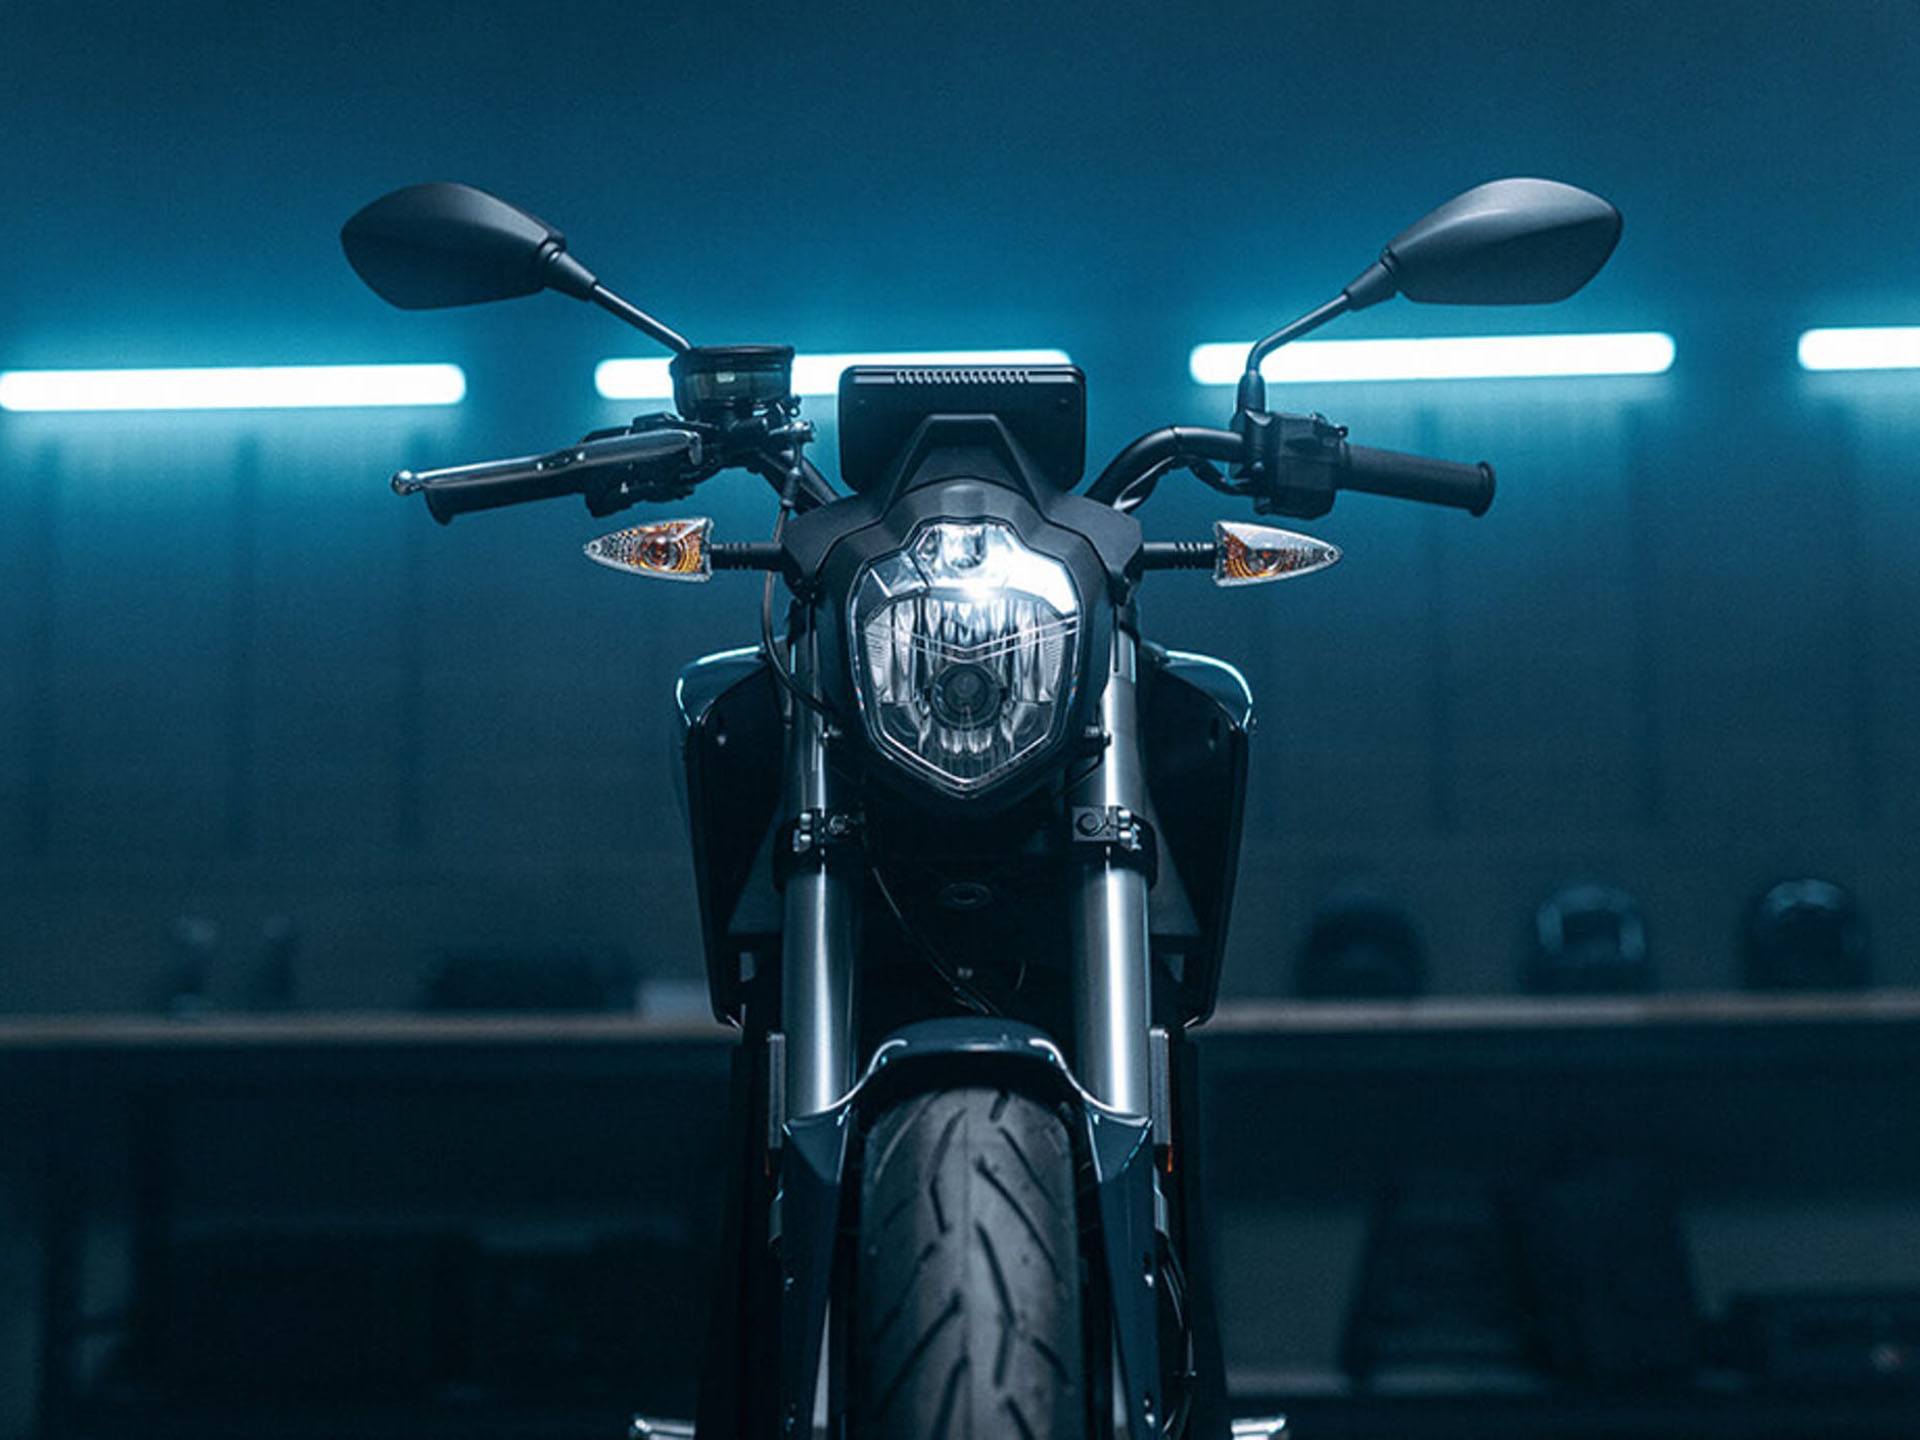 2022 Zero Motorcycles S ZF7.2 in Enfield, Connecticut - Photo 11